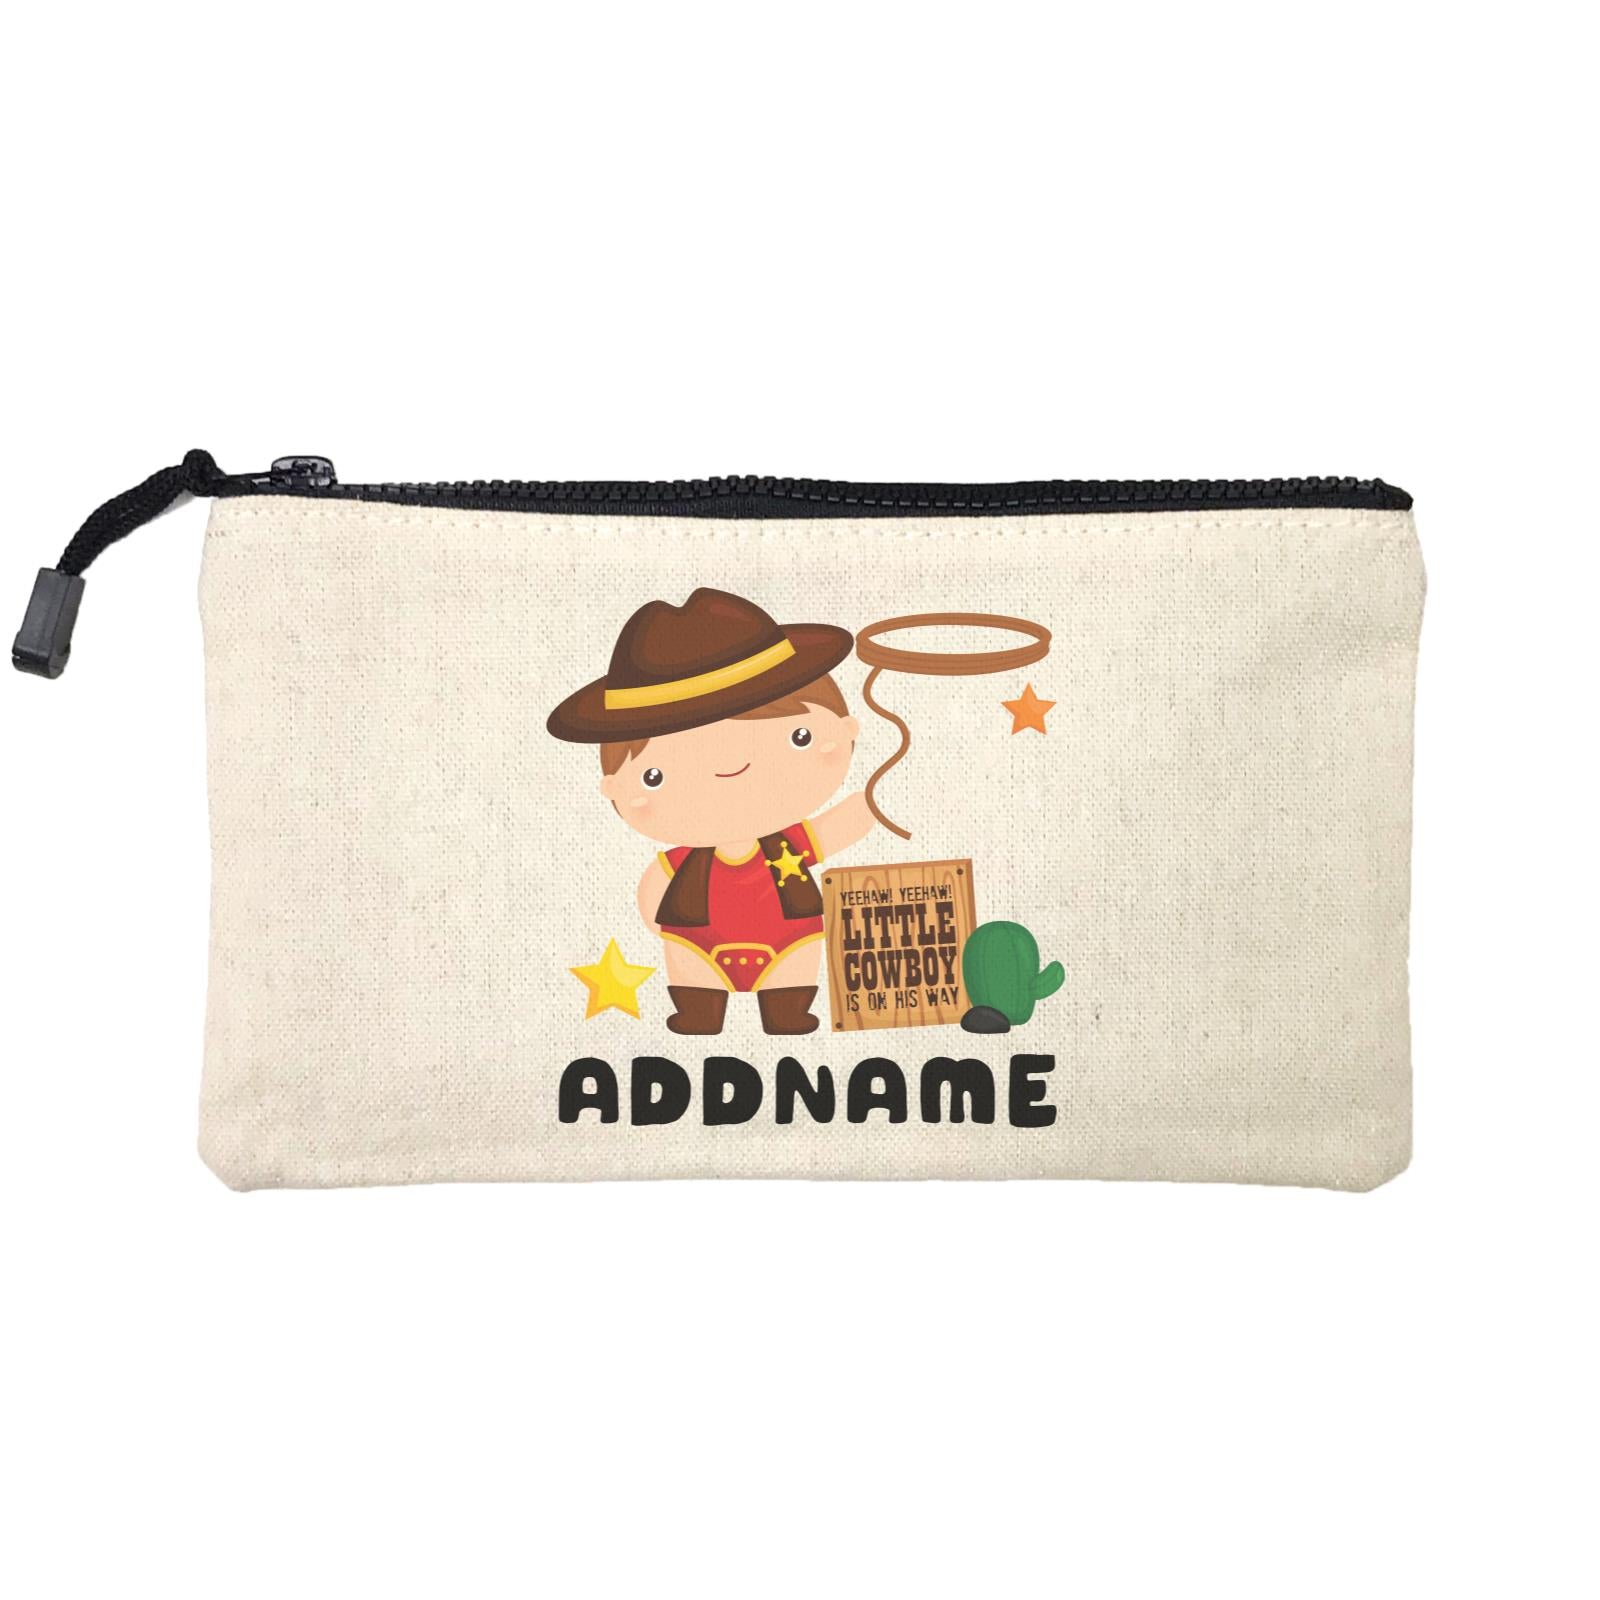 Birthday Cowboy Style Yeehaw Little Cowboy Is On His Way Addname Mini Accessories Stationery Pouch